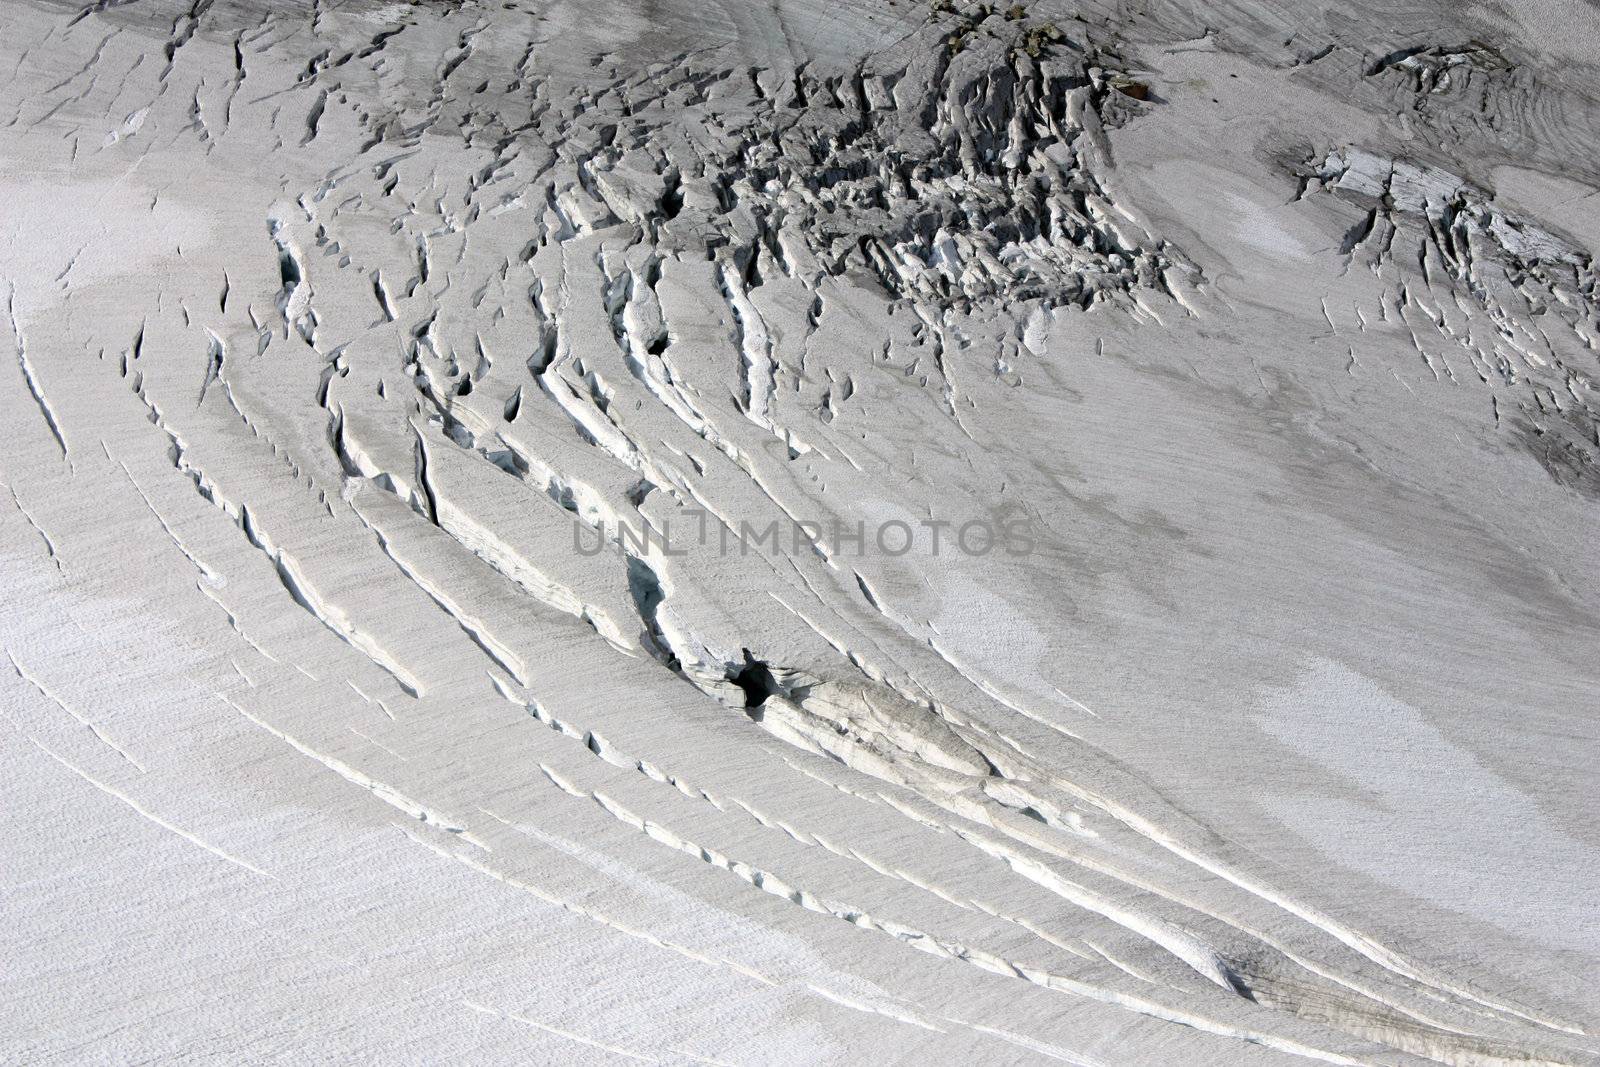 Crevasses In A Glacier Surface by mmgphoto